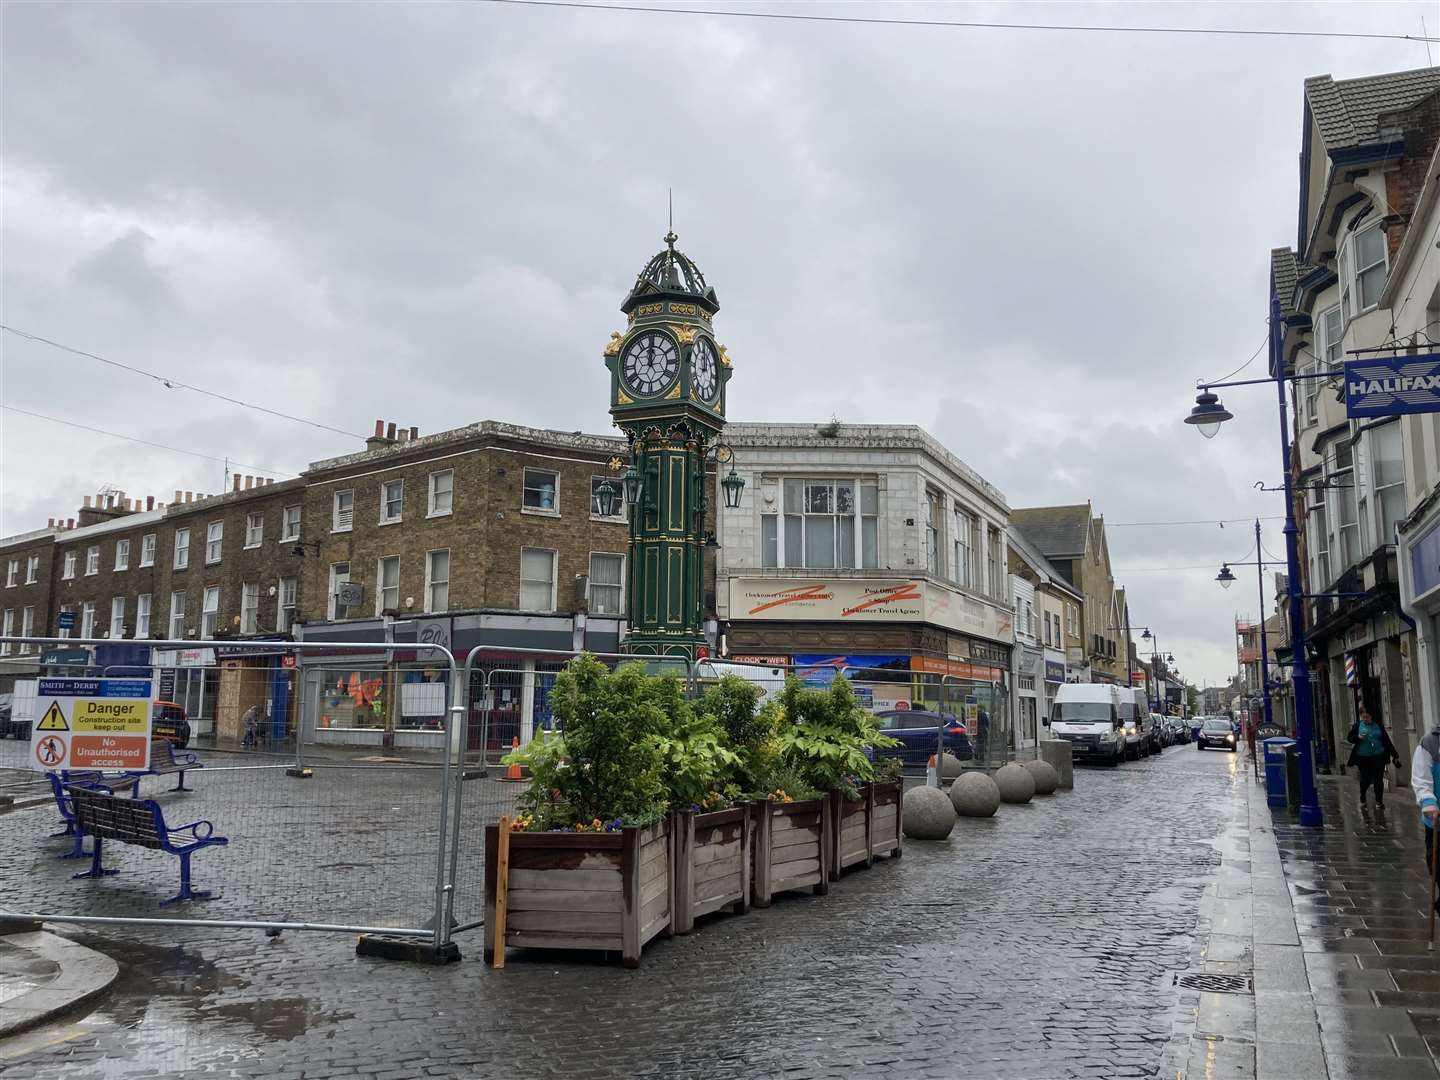 No bunting or celebrations for Sheerness clock tower